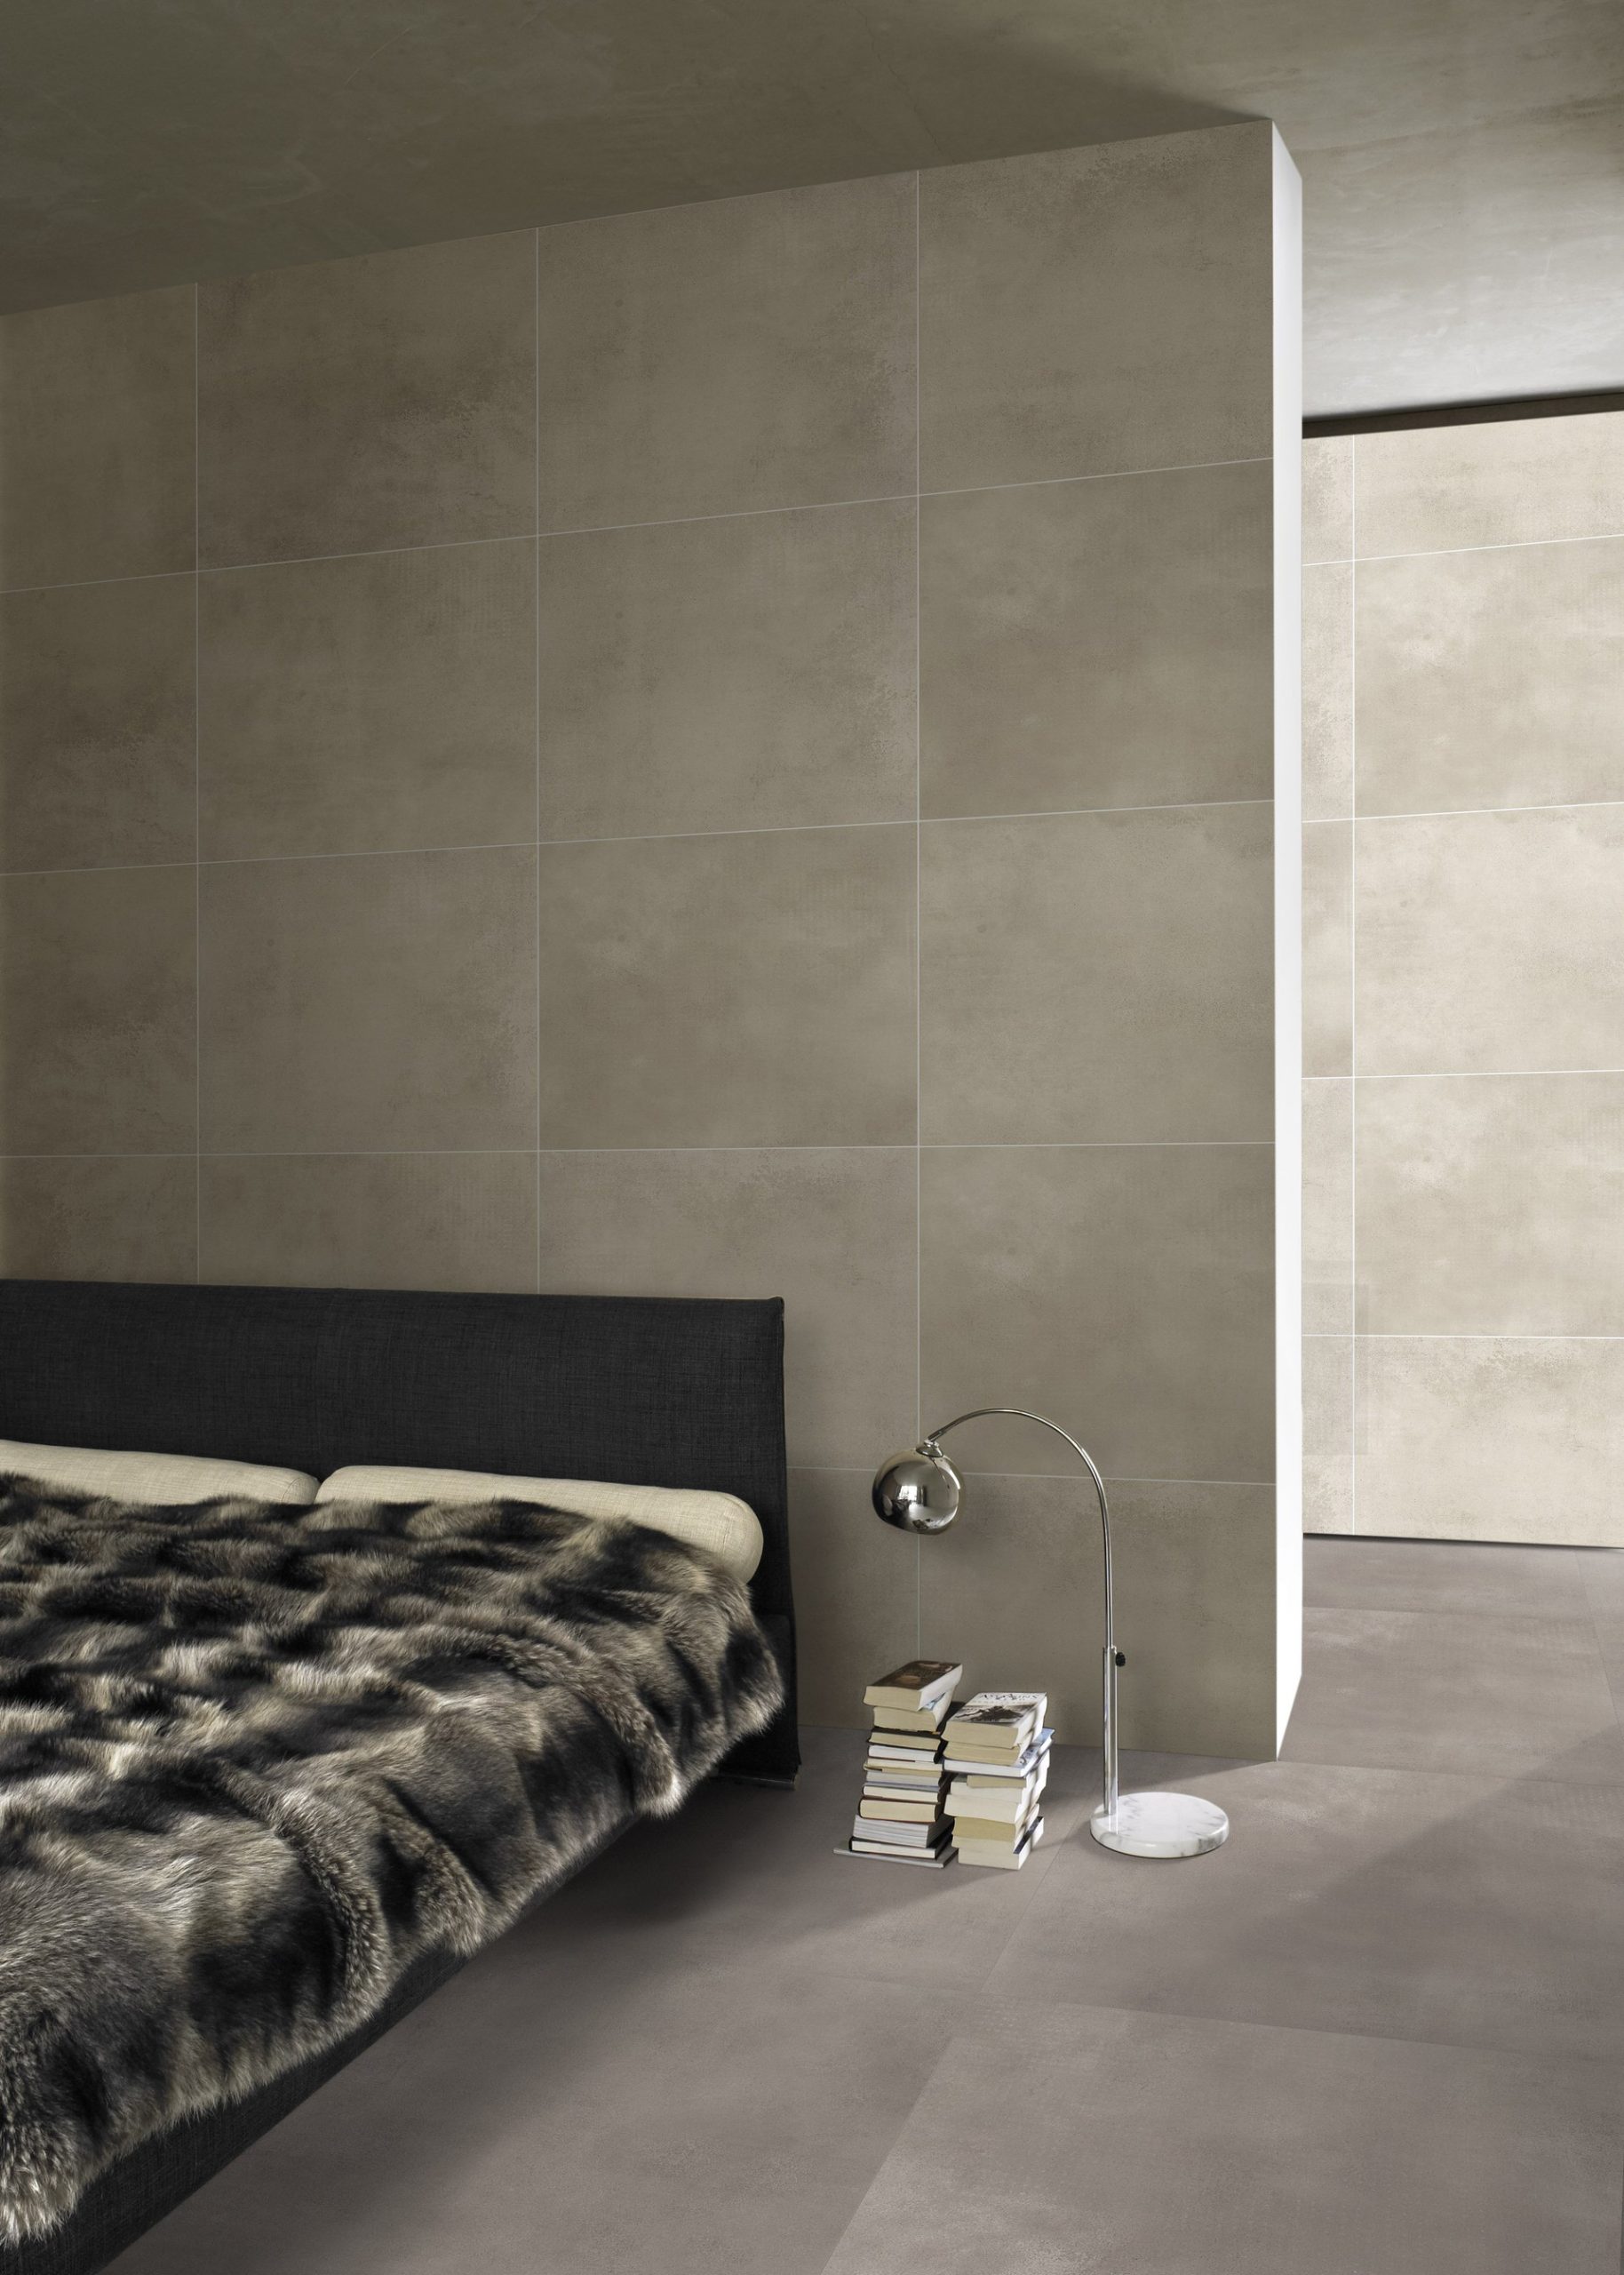 Tile at Discount Prices